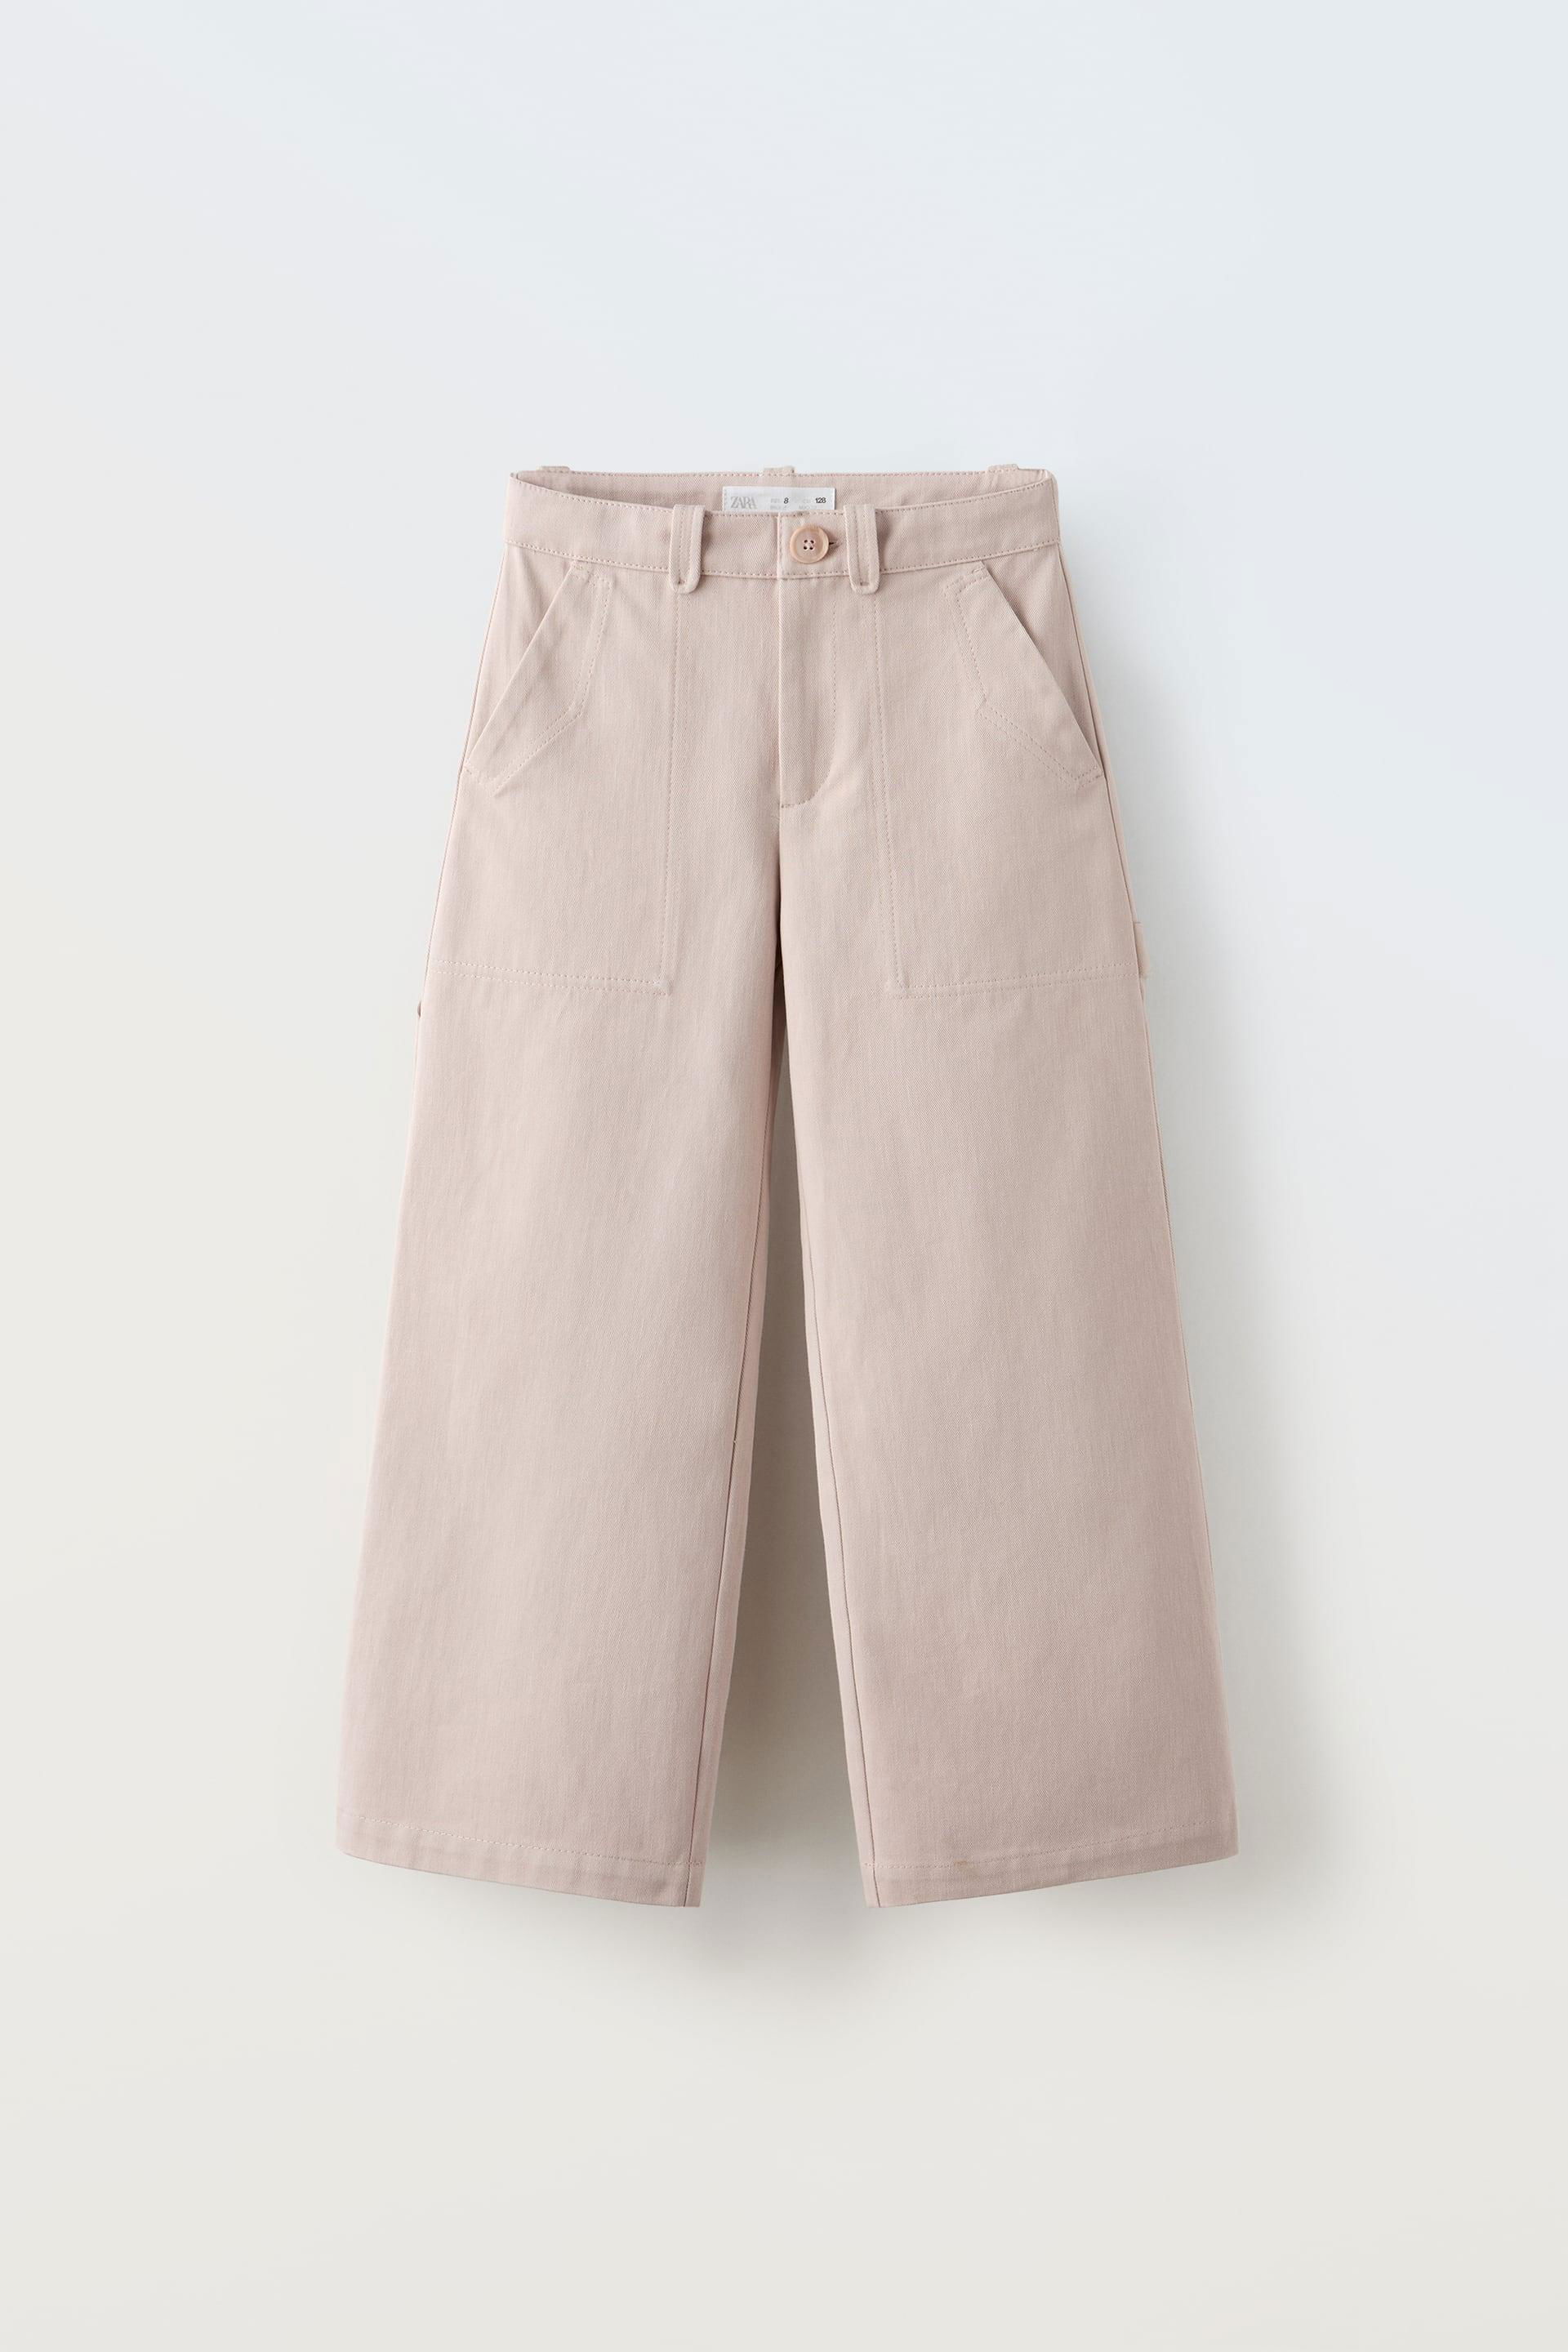 PANTS WITH POCKETS by ZARA